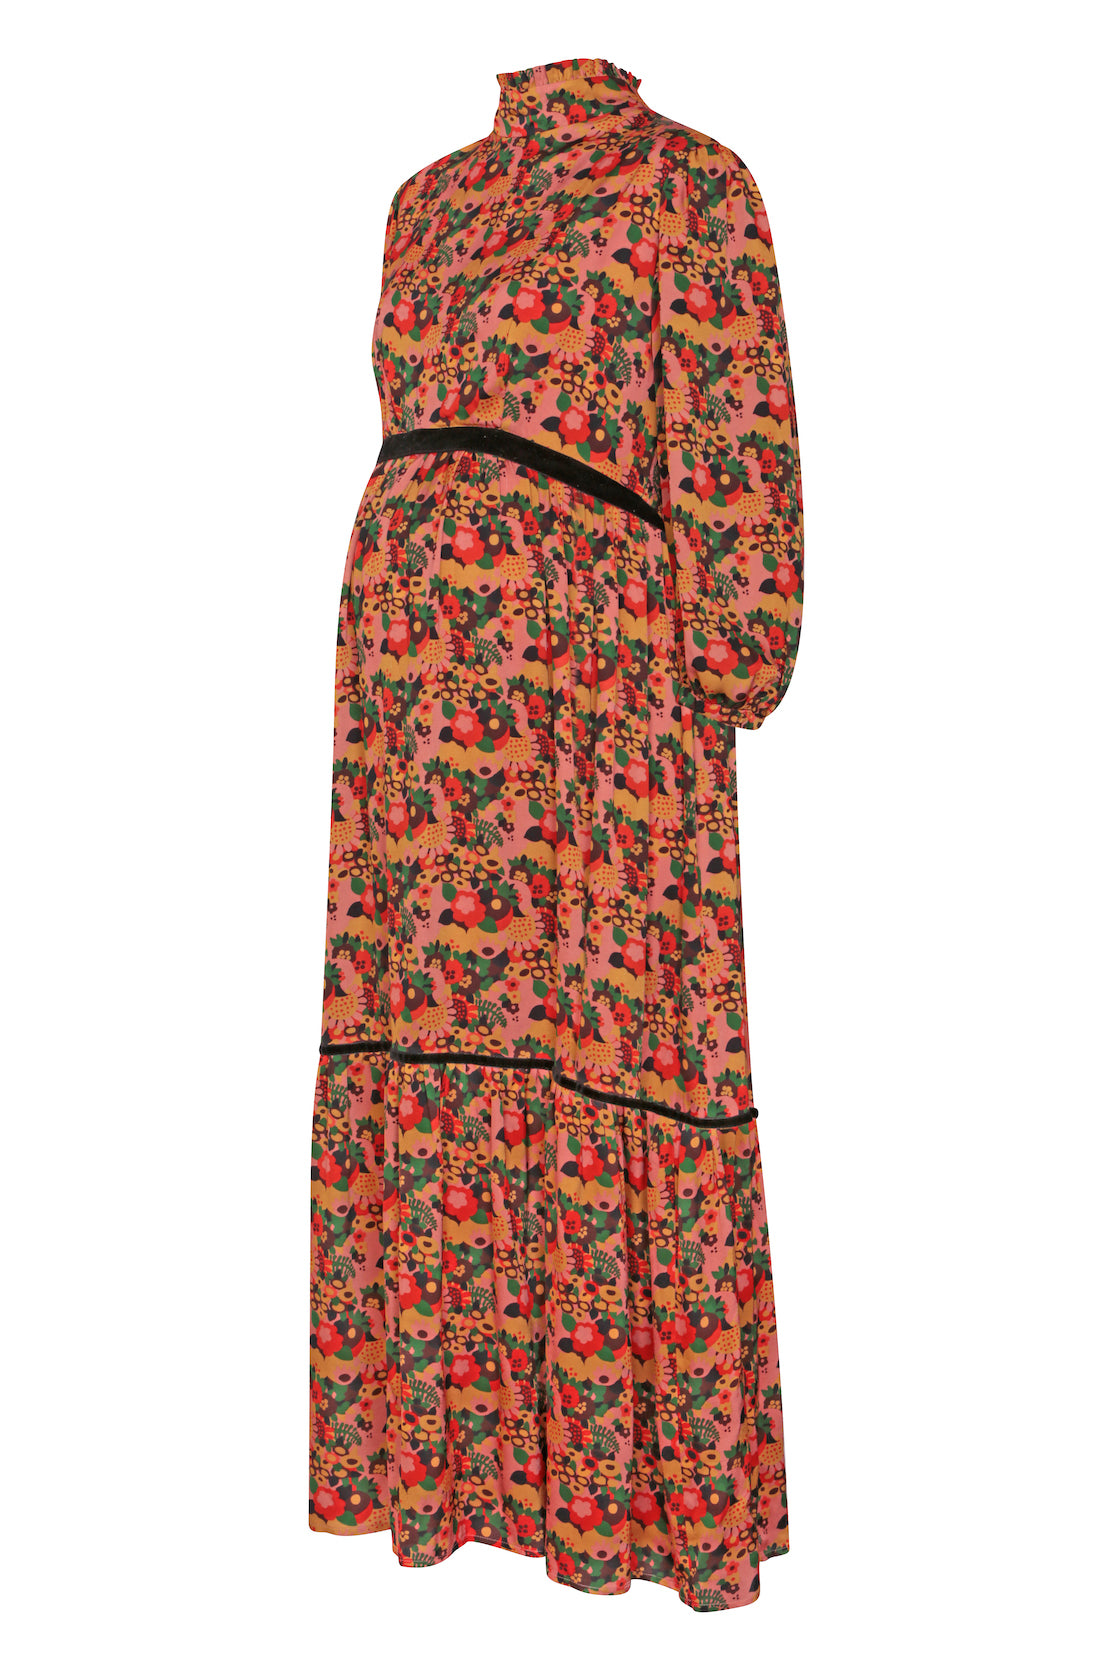 Floral maternity and breastfeeding dress. Stylish maternity occasion wear dress for all stages of motherhood. A Bump-to-Baby long midi dress, designed to flatter every trimester and then with discreet zips for nursing mothers. Vibrant winter tones on a luxuriant sateen fabric, that will take you from day to evening.